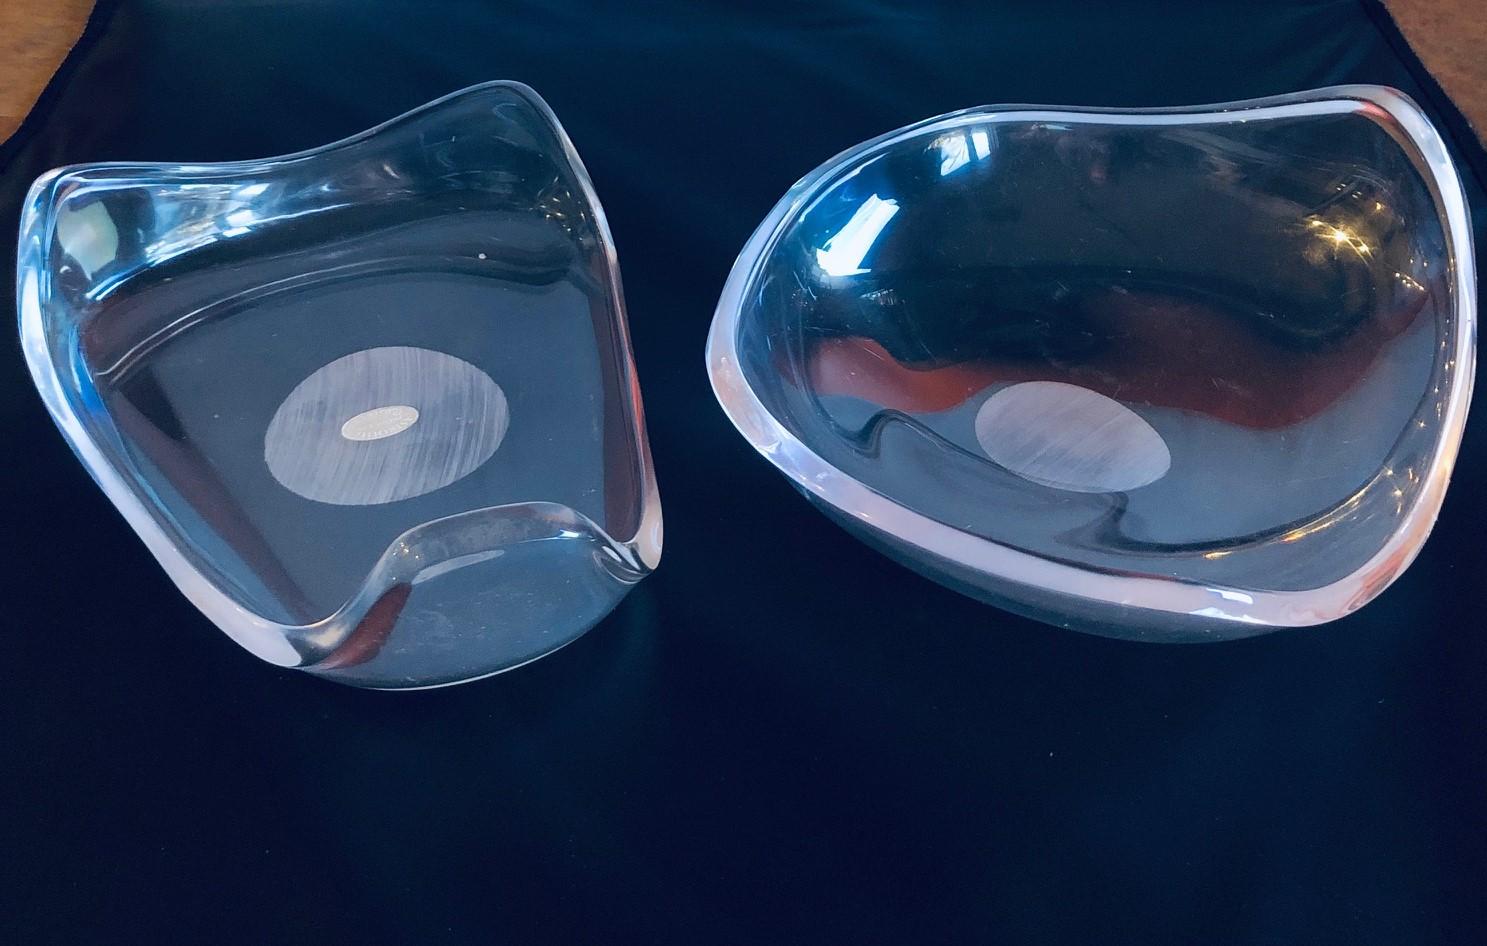 A very nice pair of freeform sculptural acrylic bowls from the Astrolite Products line by the Ritts Co. of Los Angeles, circa 1970s. The bowls are in very good vintage condition and the triangular one still has its foil label on it. The bowls